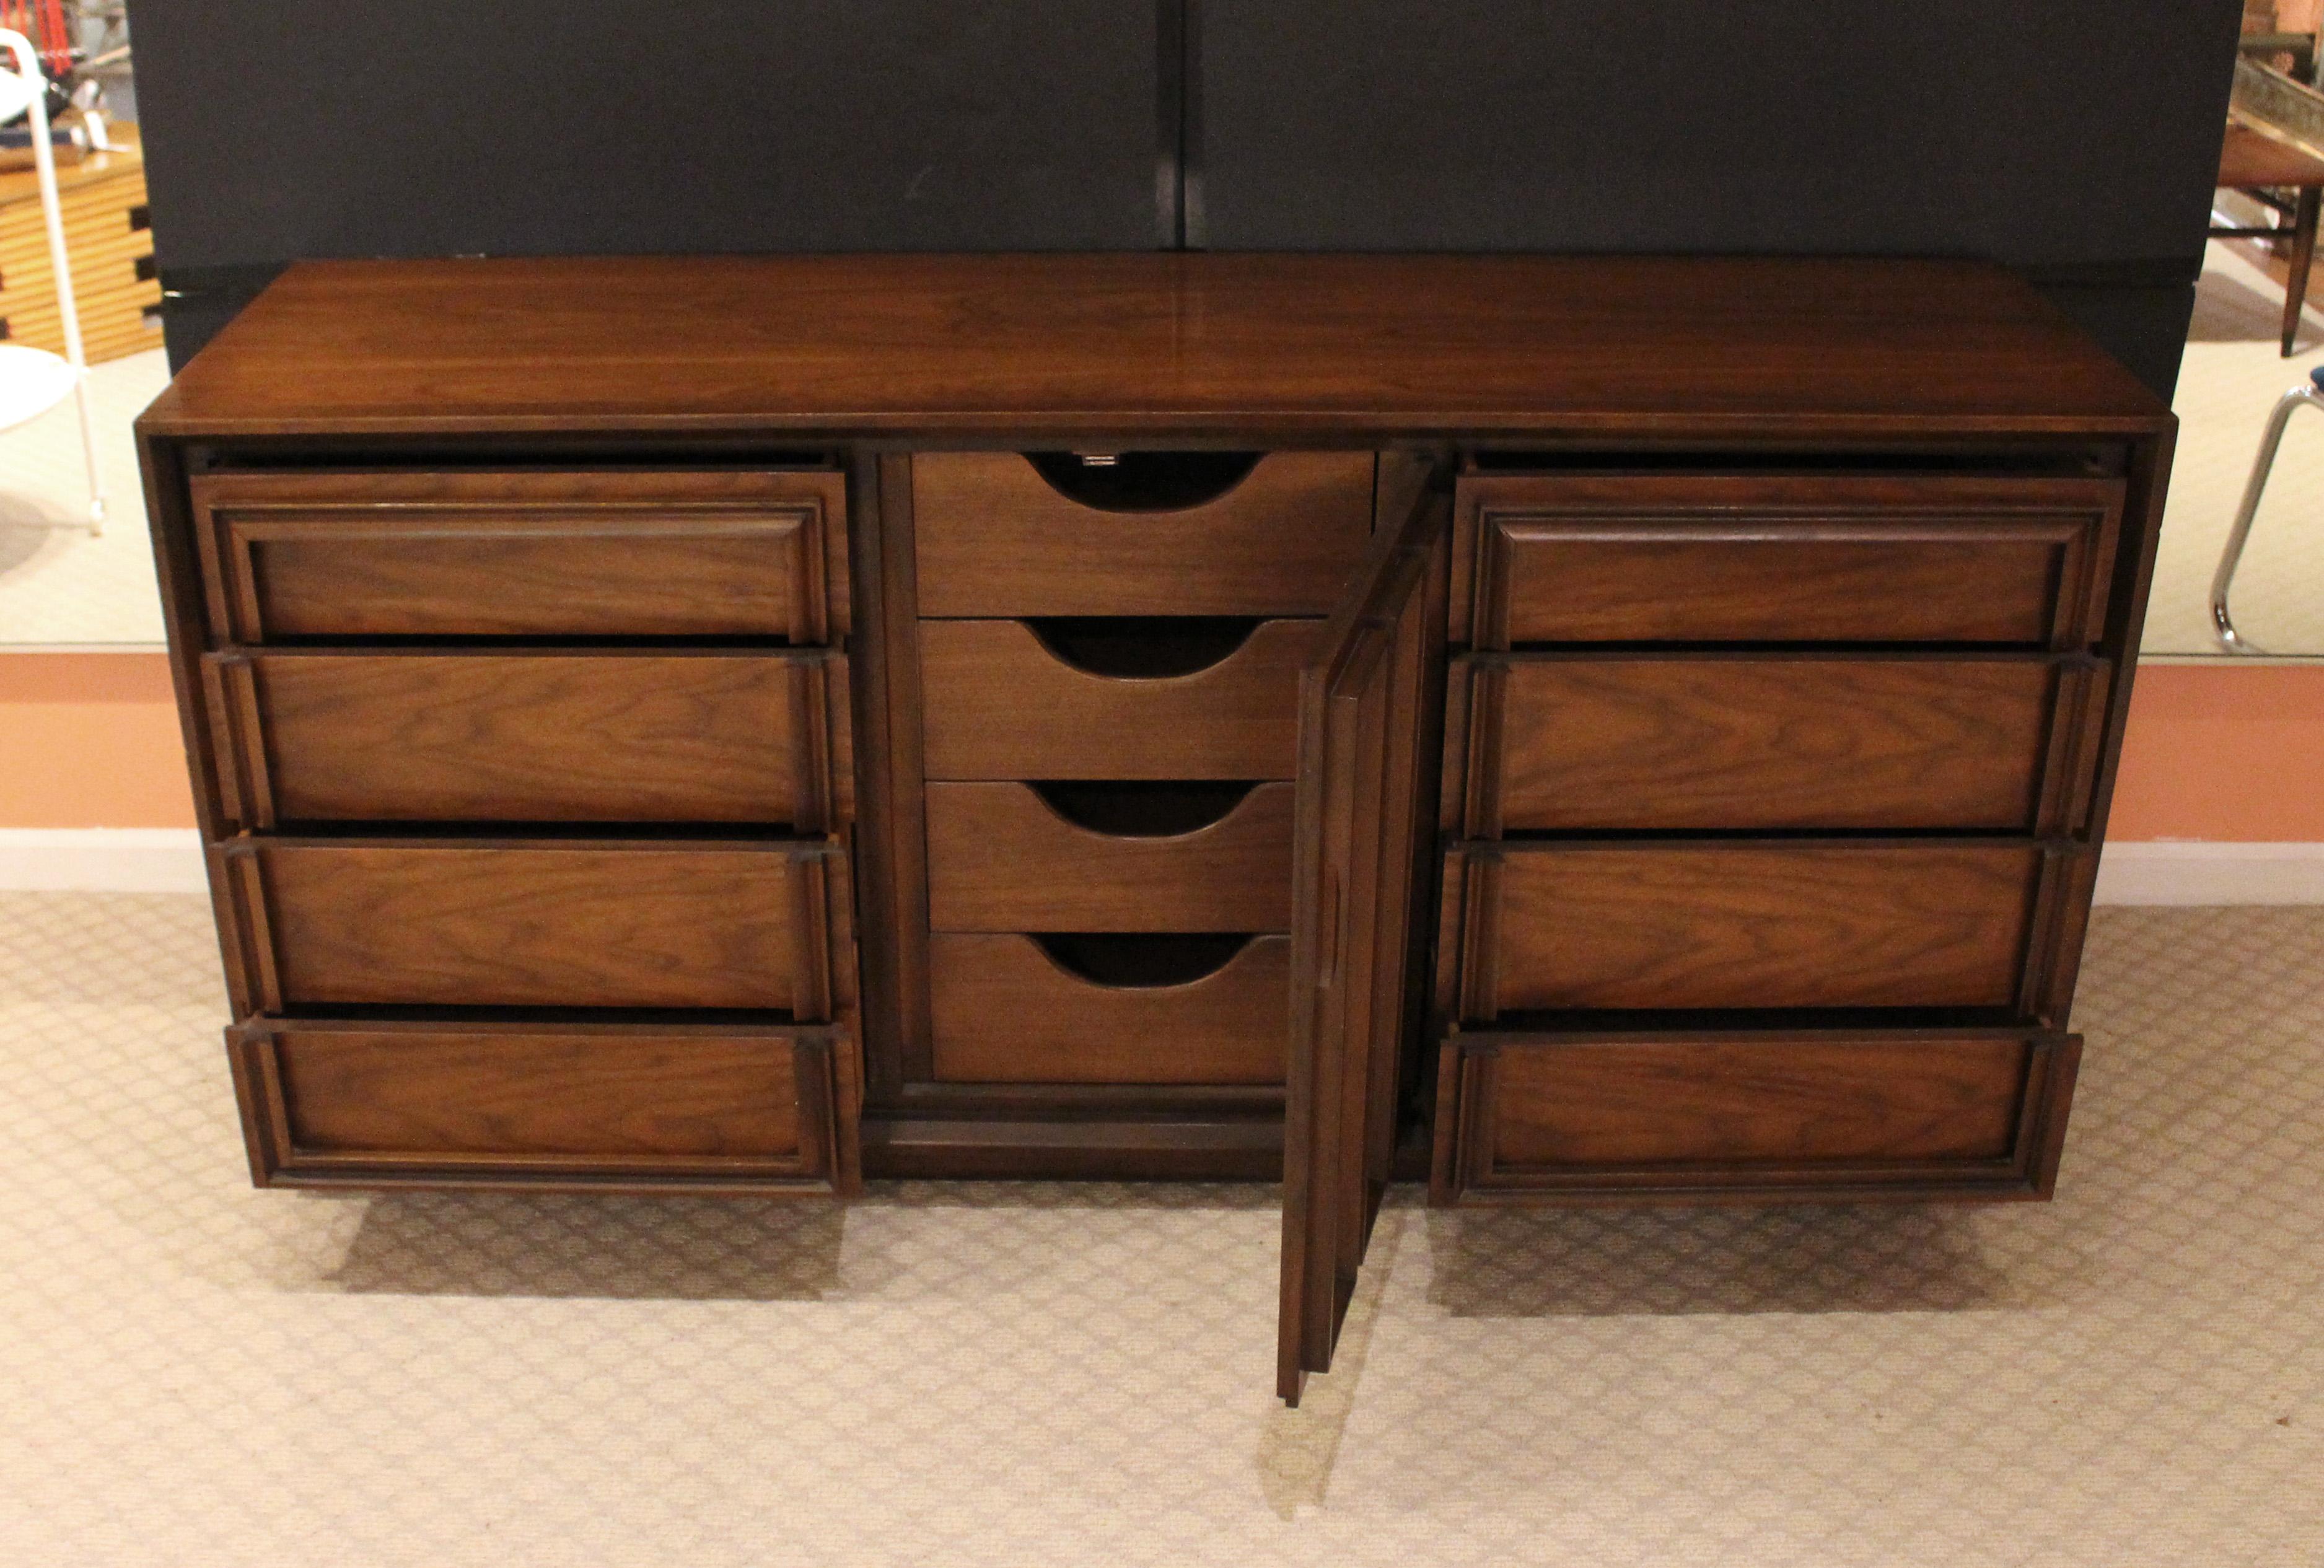 circa 1960s Mid-Century Modern Low Dresser or Credenza In Good Condition For Sale In Chapel Hill, NC